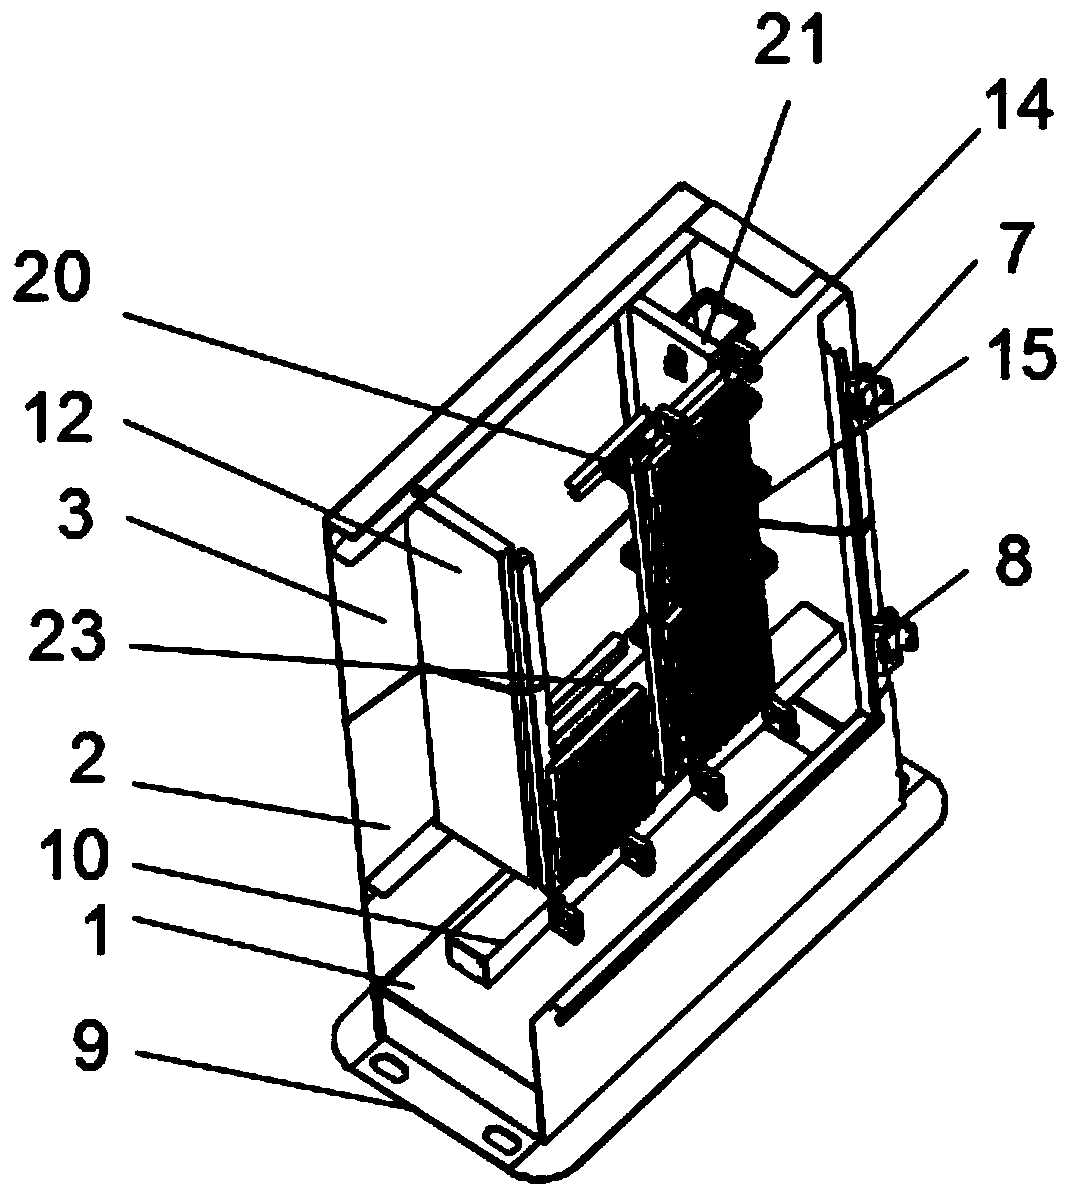 Assembled optical cable cross-connecting box capable of expanding capacity